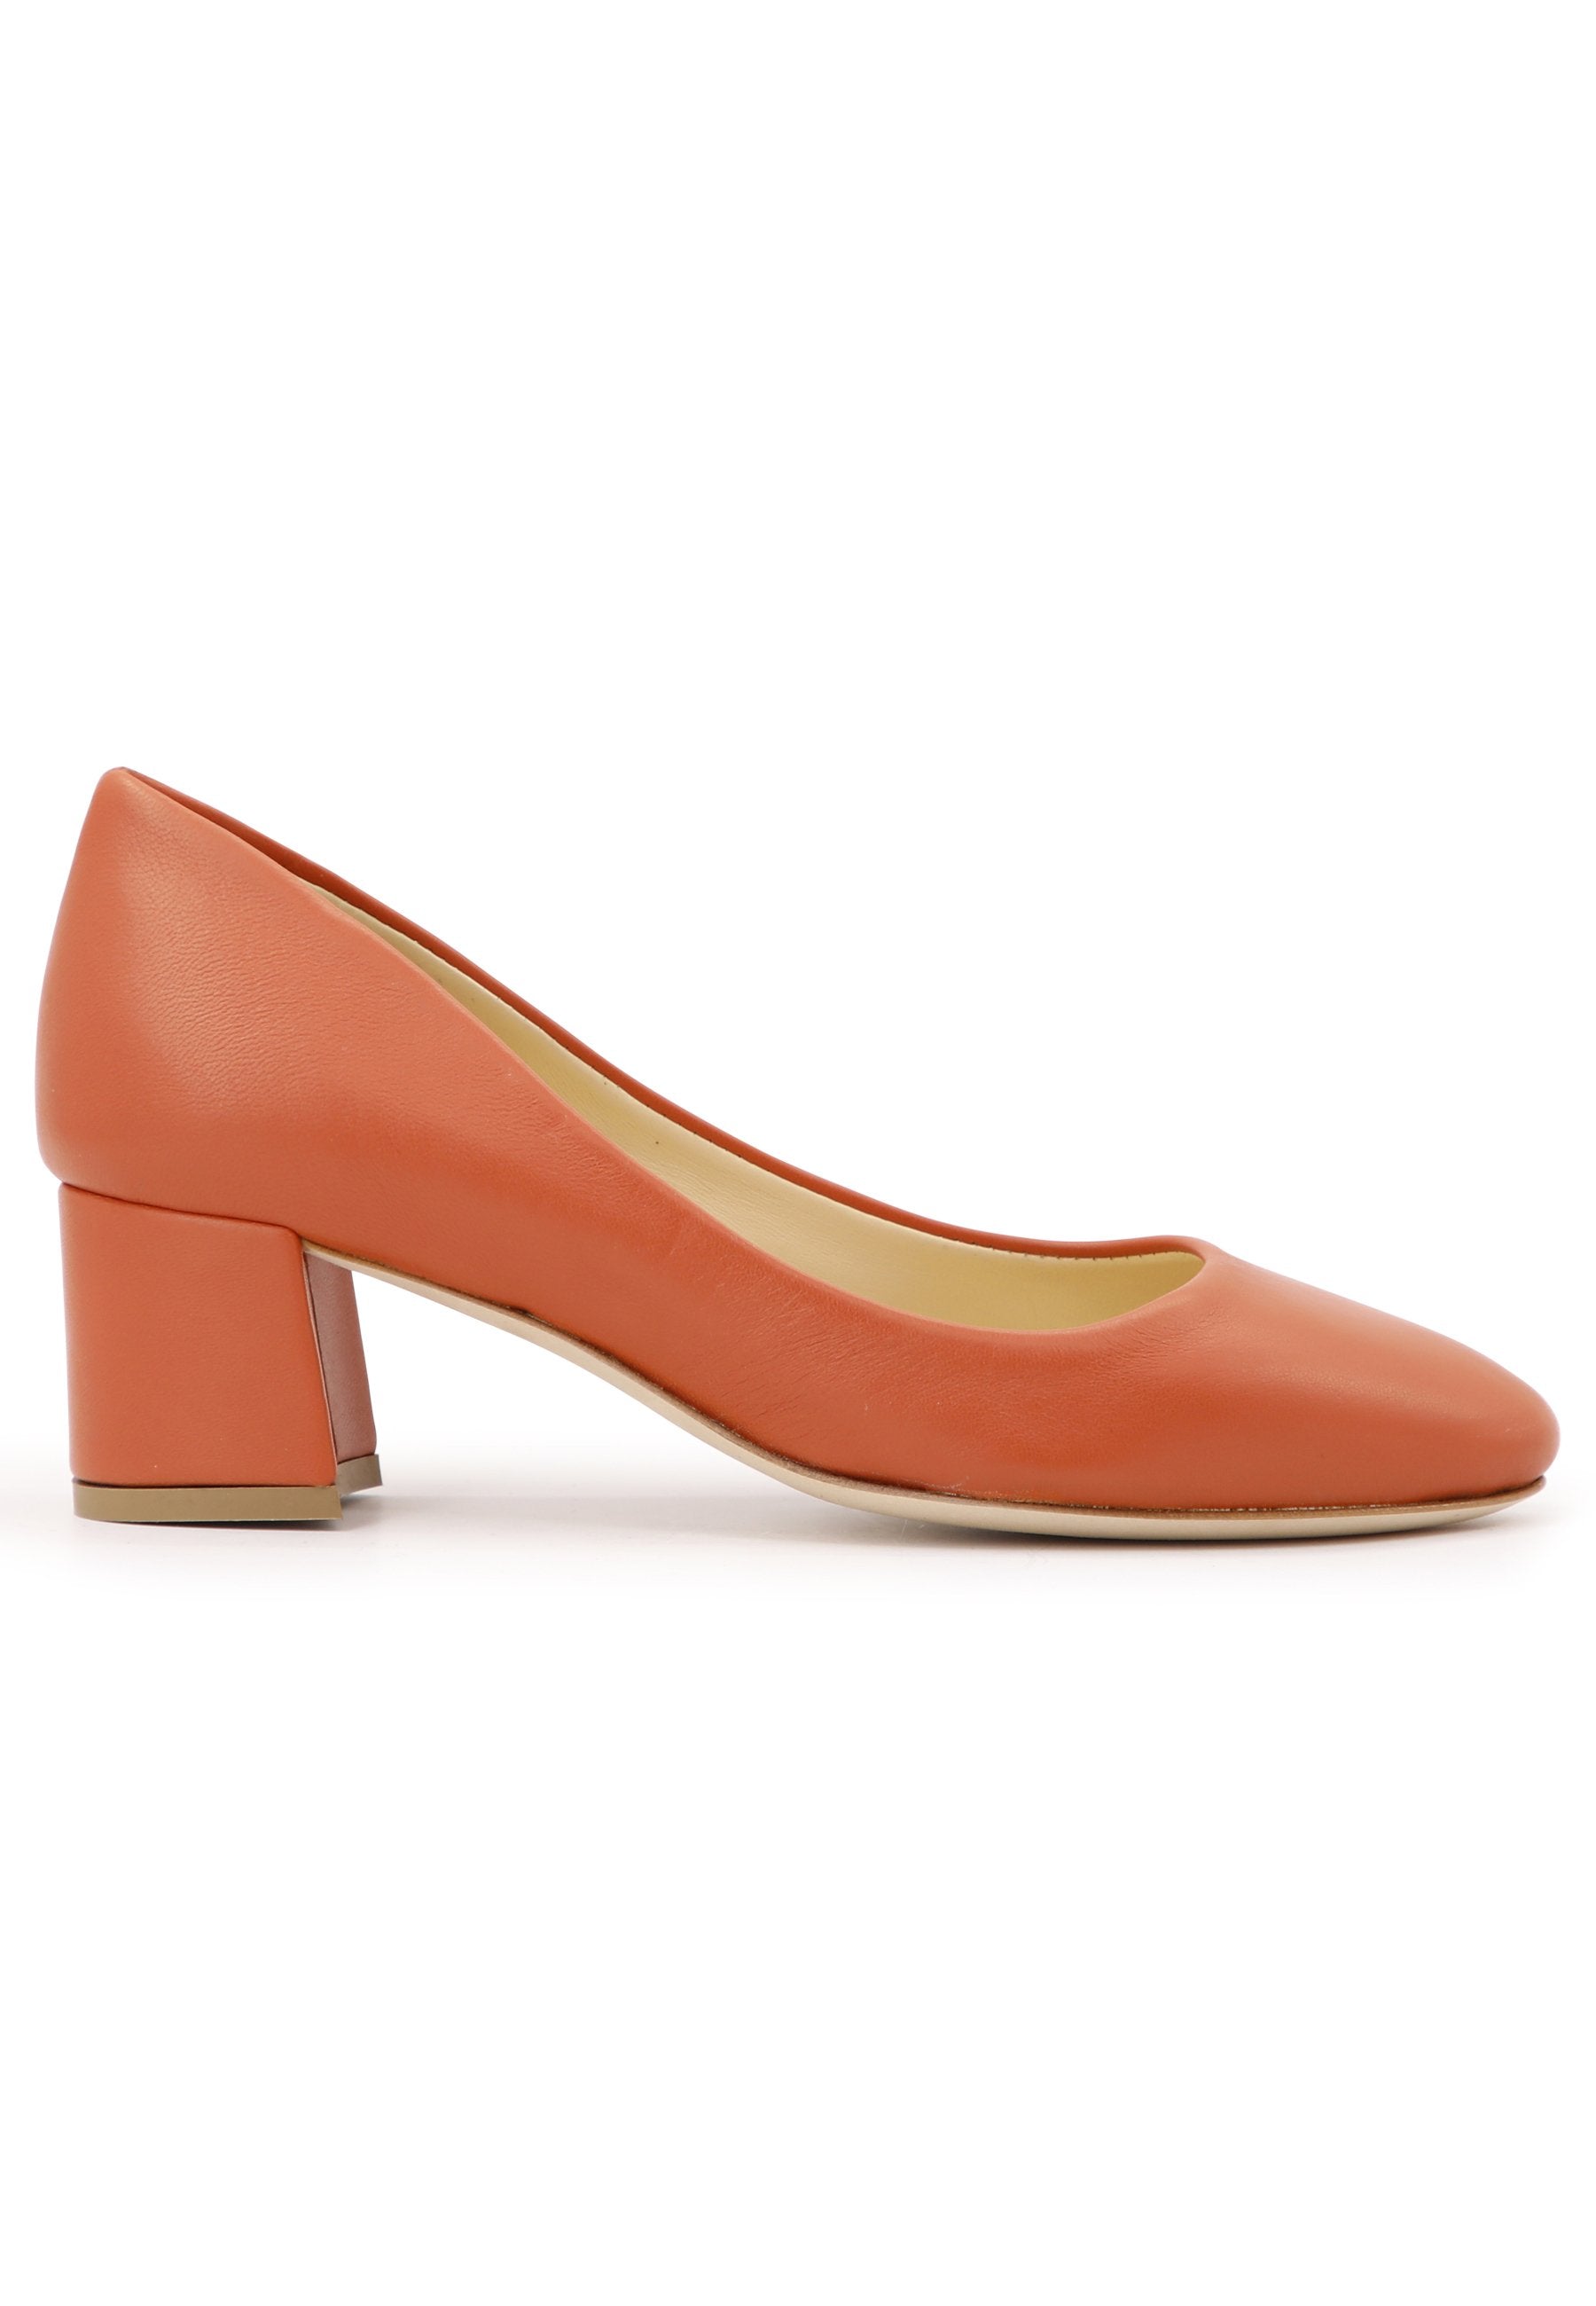 Women's orange leather pumps with low heel and round toe